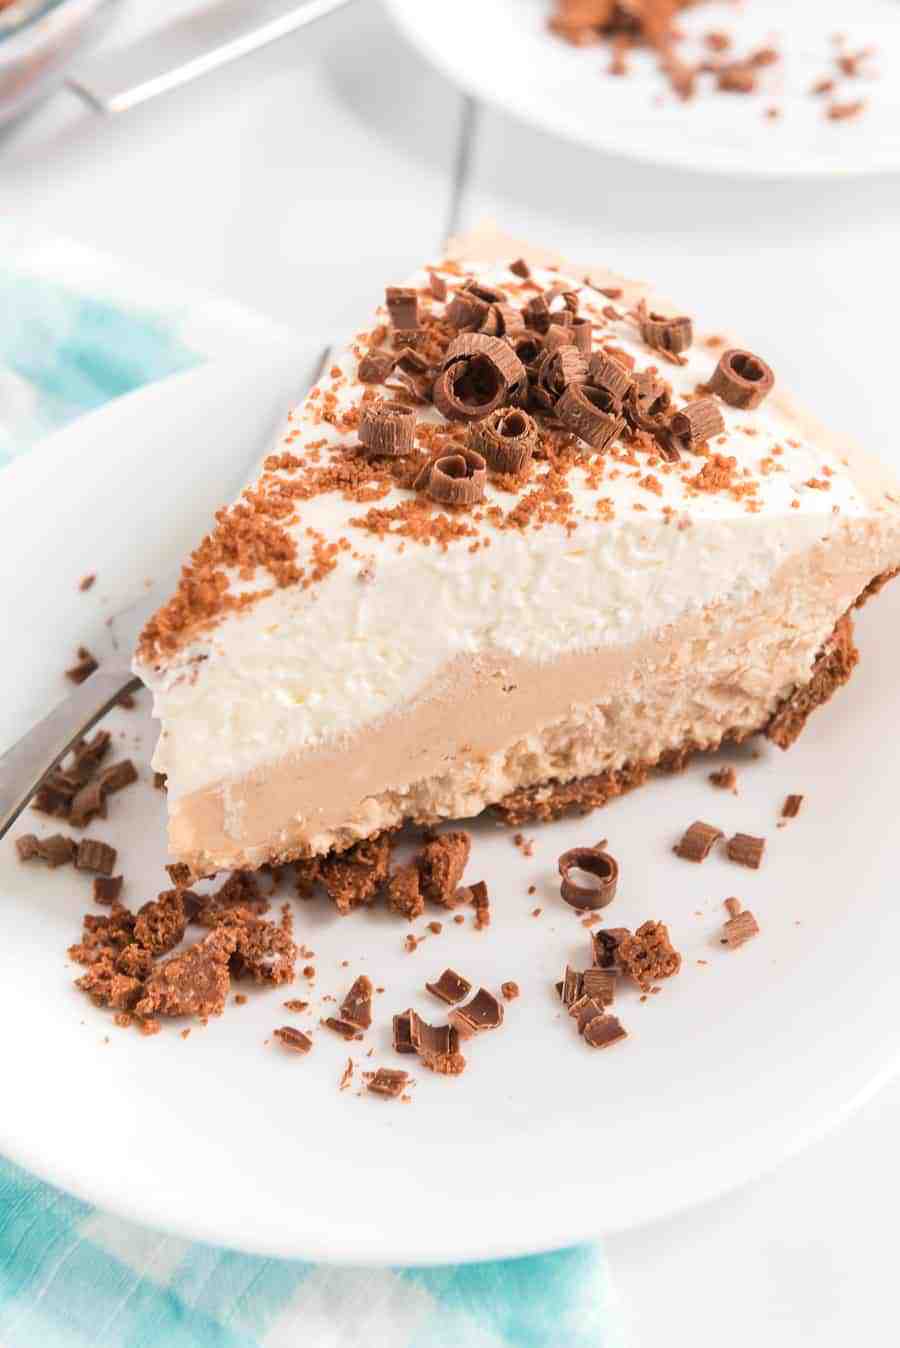 Creamy and chock-full of peanut butter, this No Bake Peanut Butter Pie has a chocolate crust and chocolate shavings on top to finish things off with perfection!